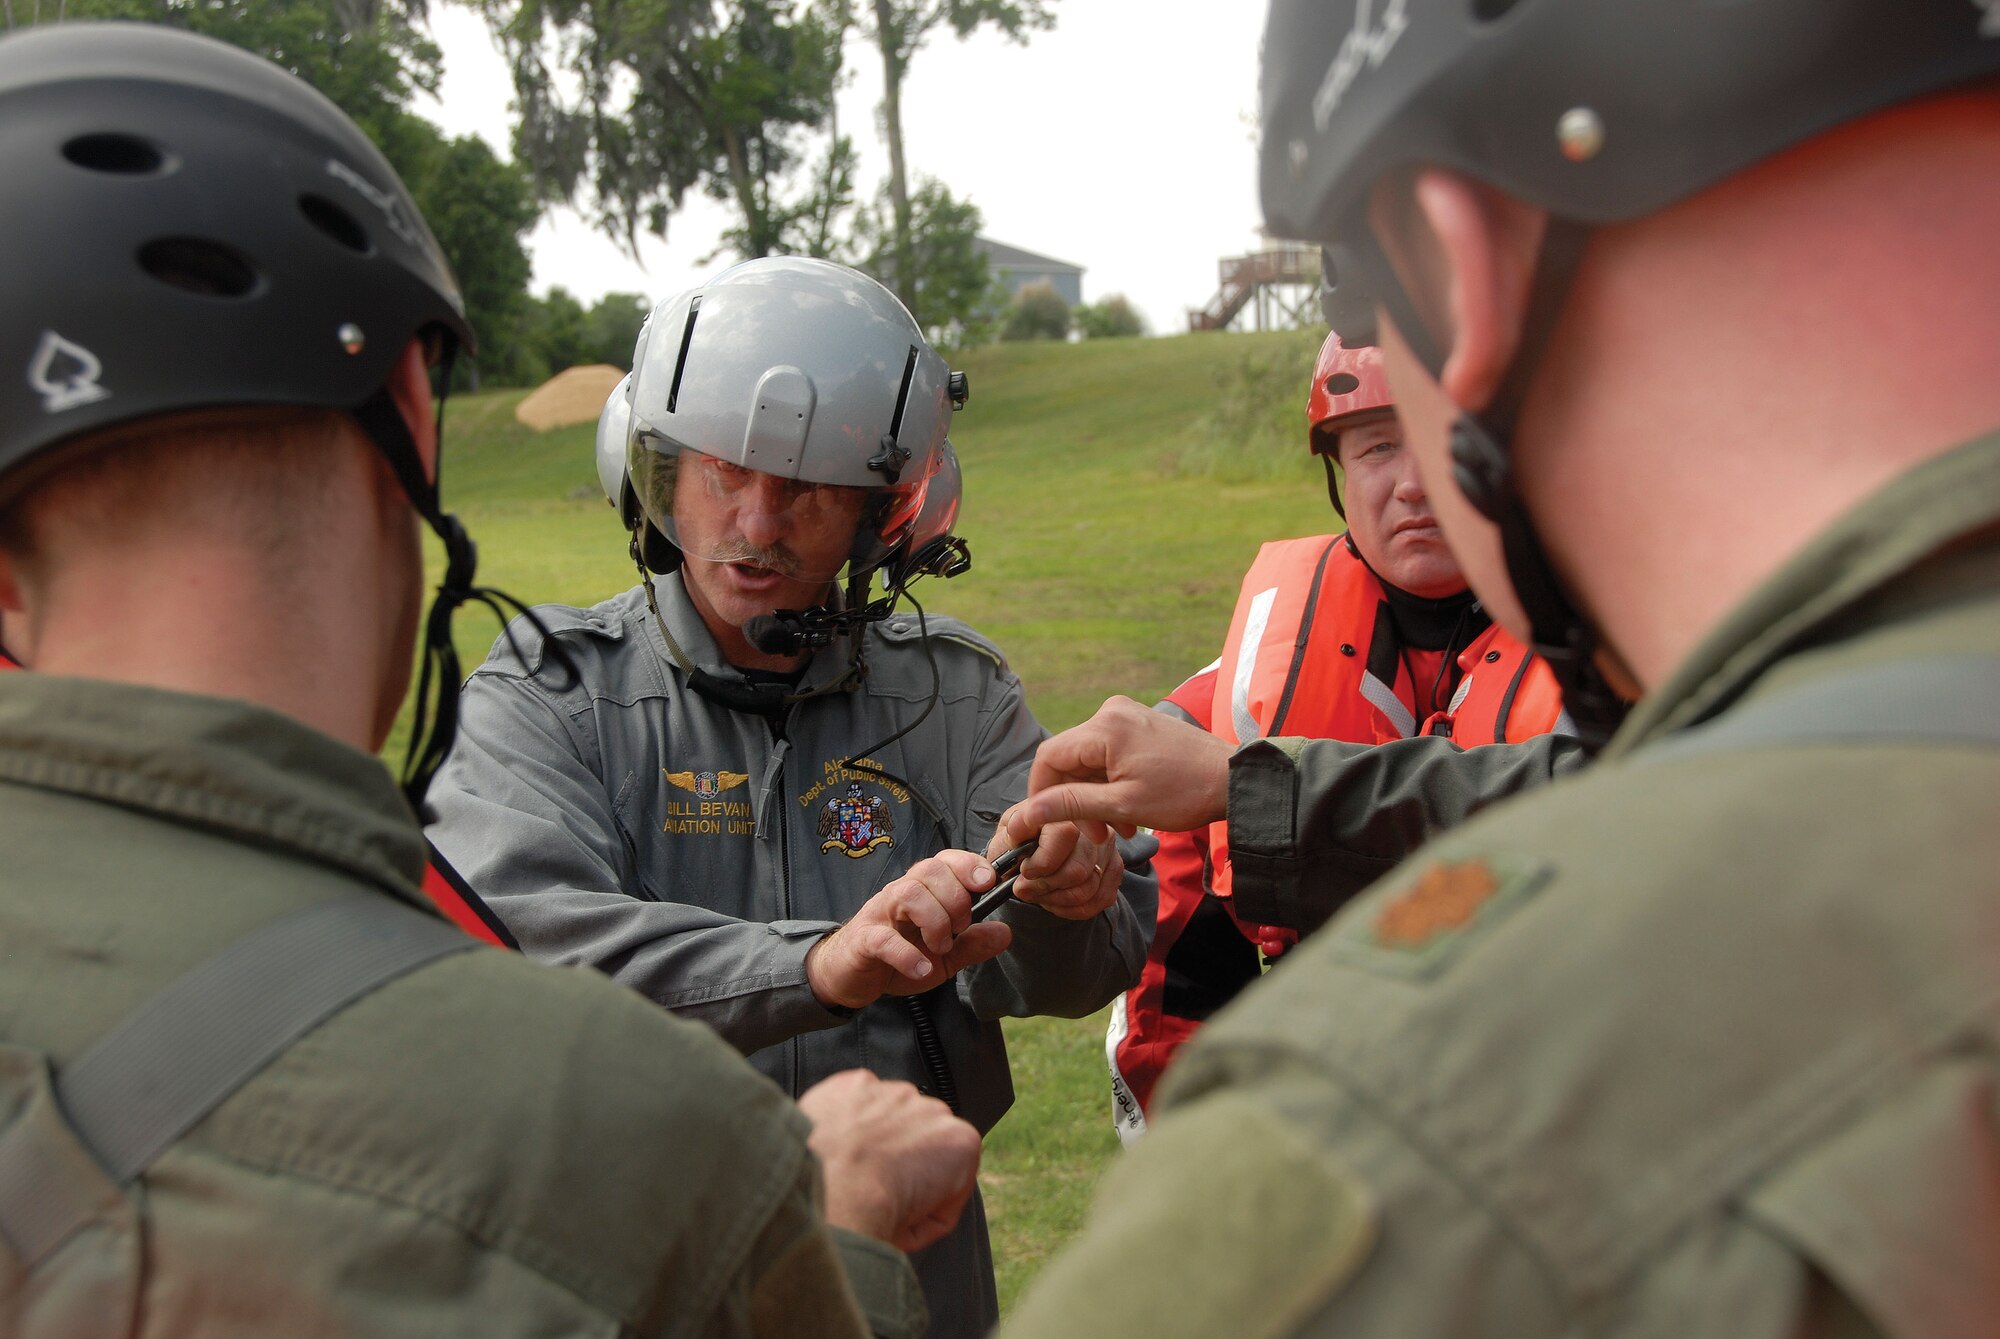 Bill Bevan of the Alabama Depaartment of Public Ssaety's Aviation Unit gives 908 Reservists a tip during water-survival training. The state troopers also took part in the training, and provided valuable expertise and their helicopter.  (Air Force photo by Gene H. Hughes)